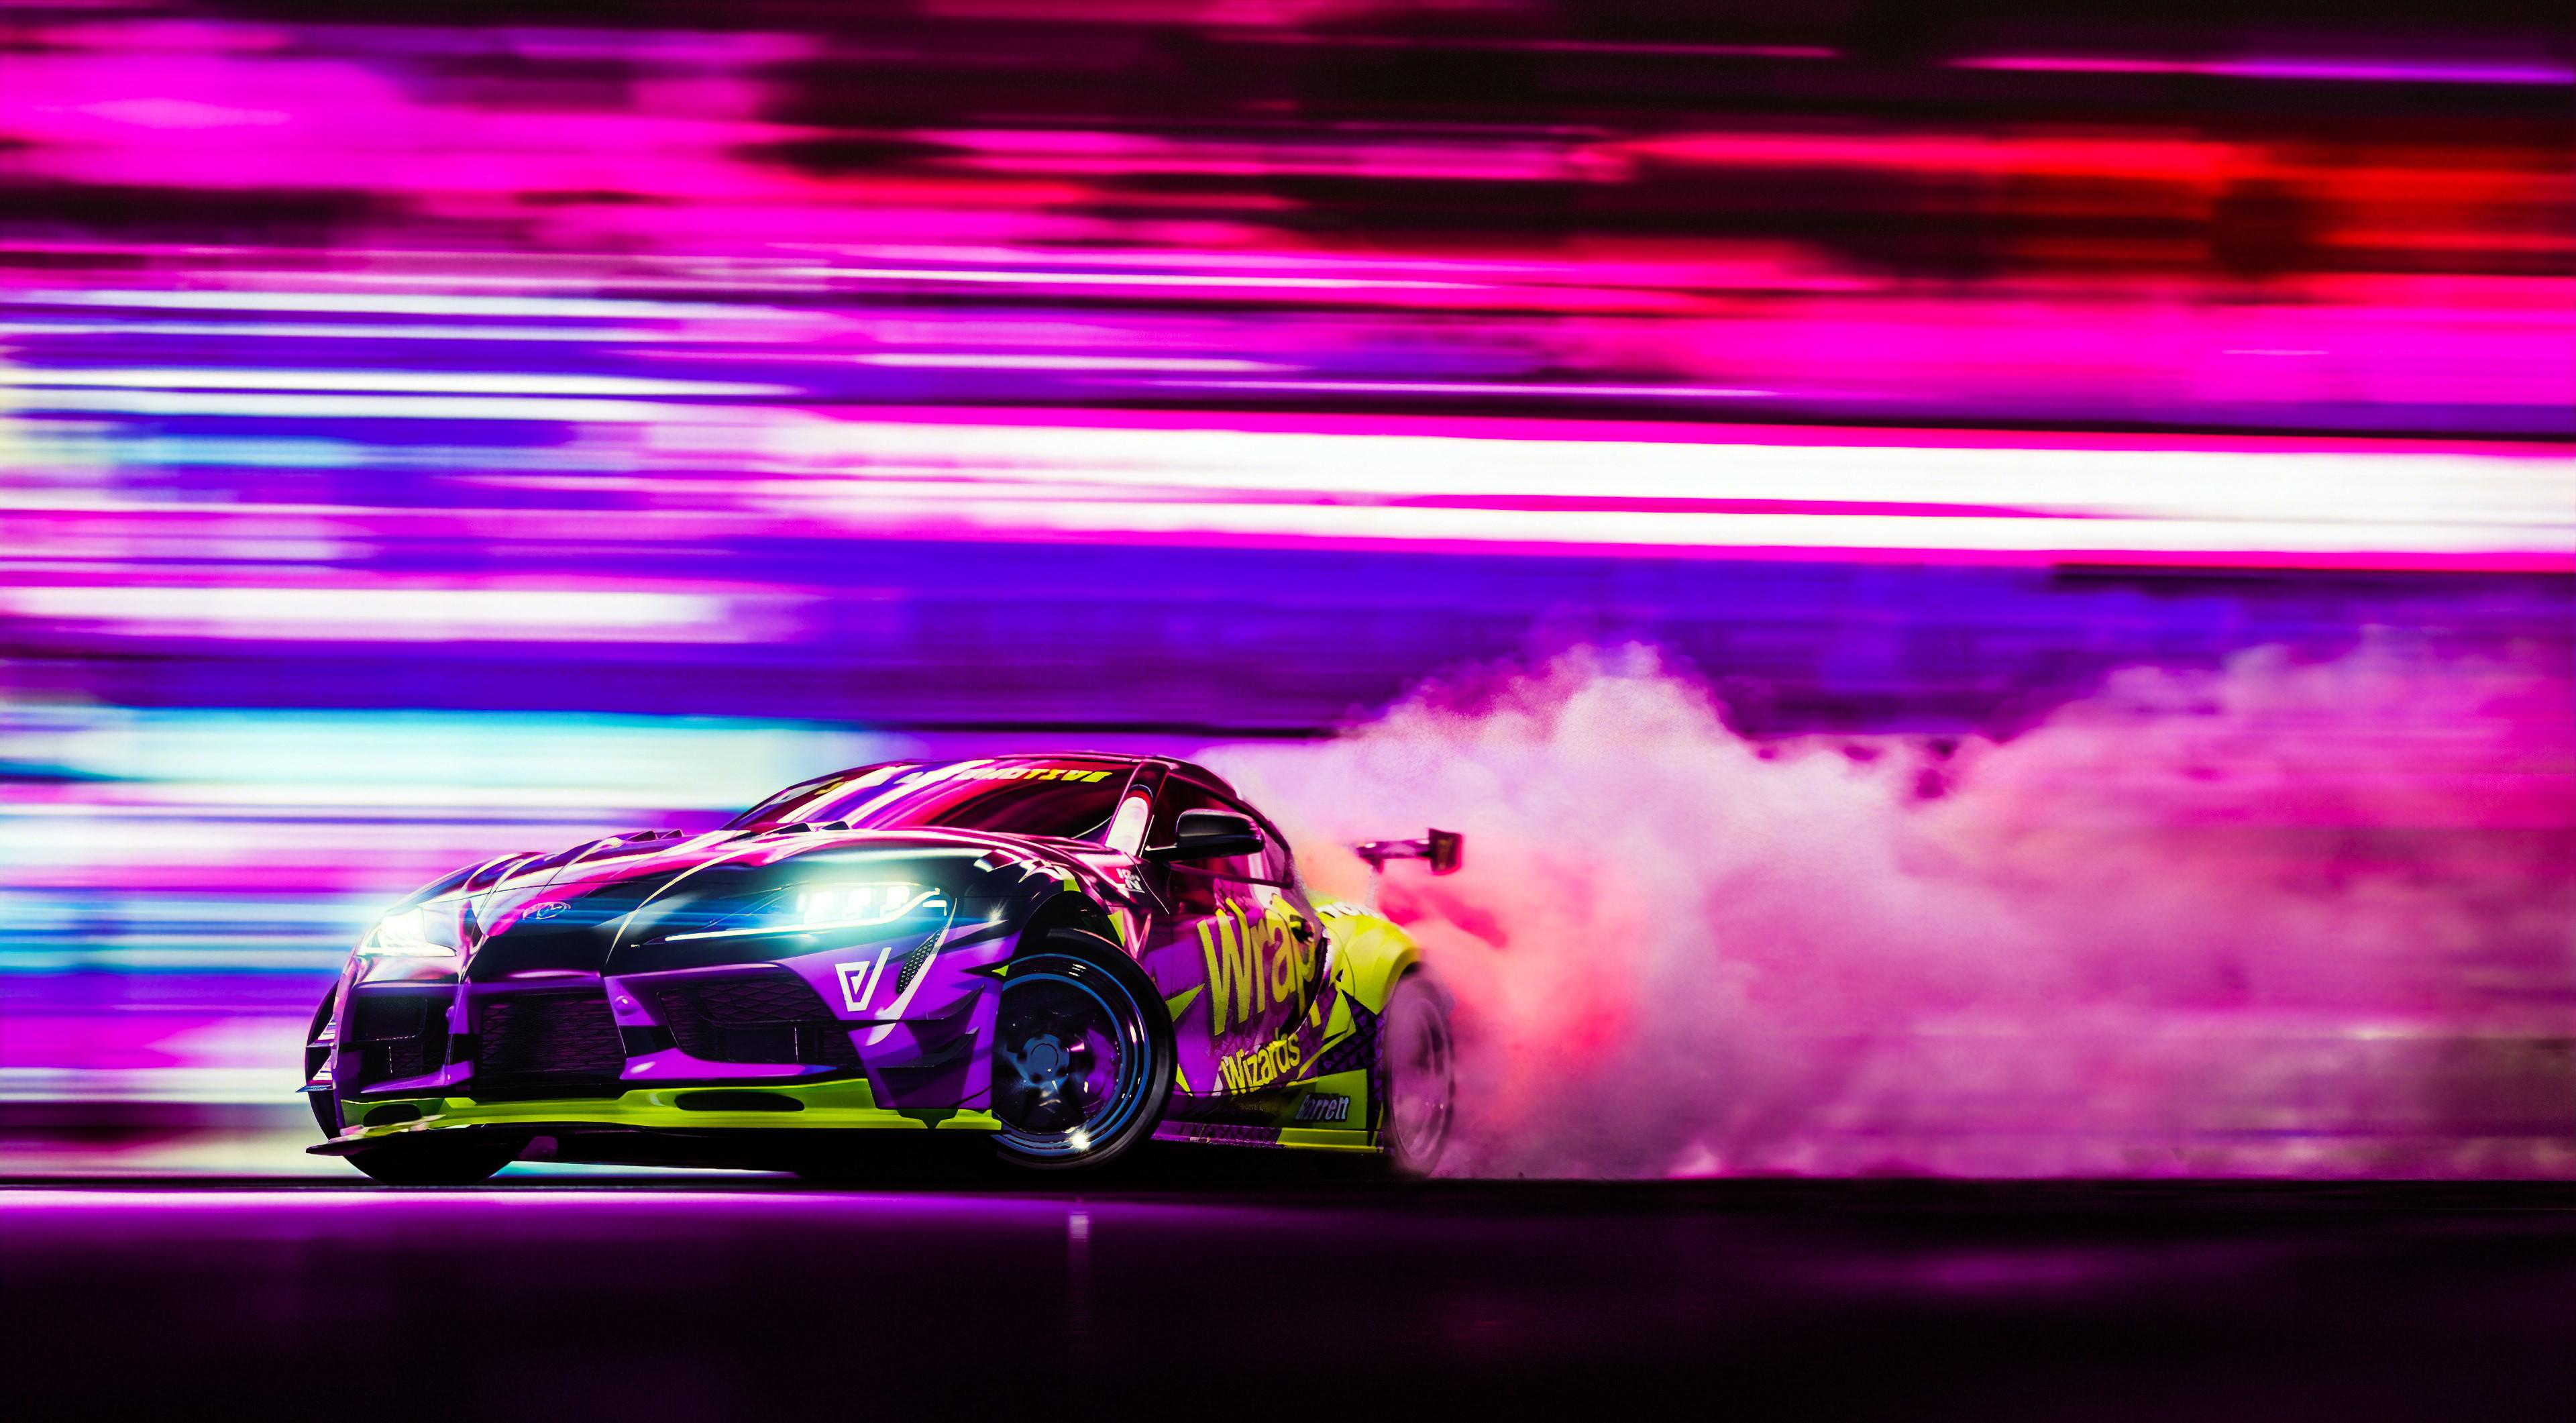 Supra 4K wallpaper for your desktop or mobile screen free and easy to download